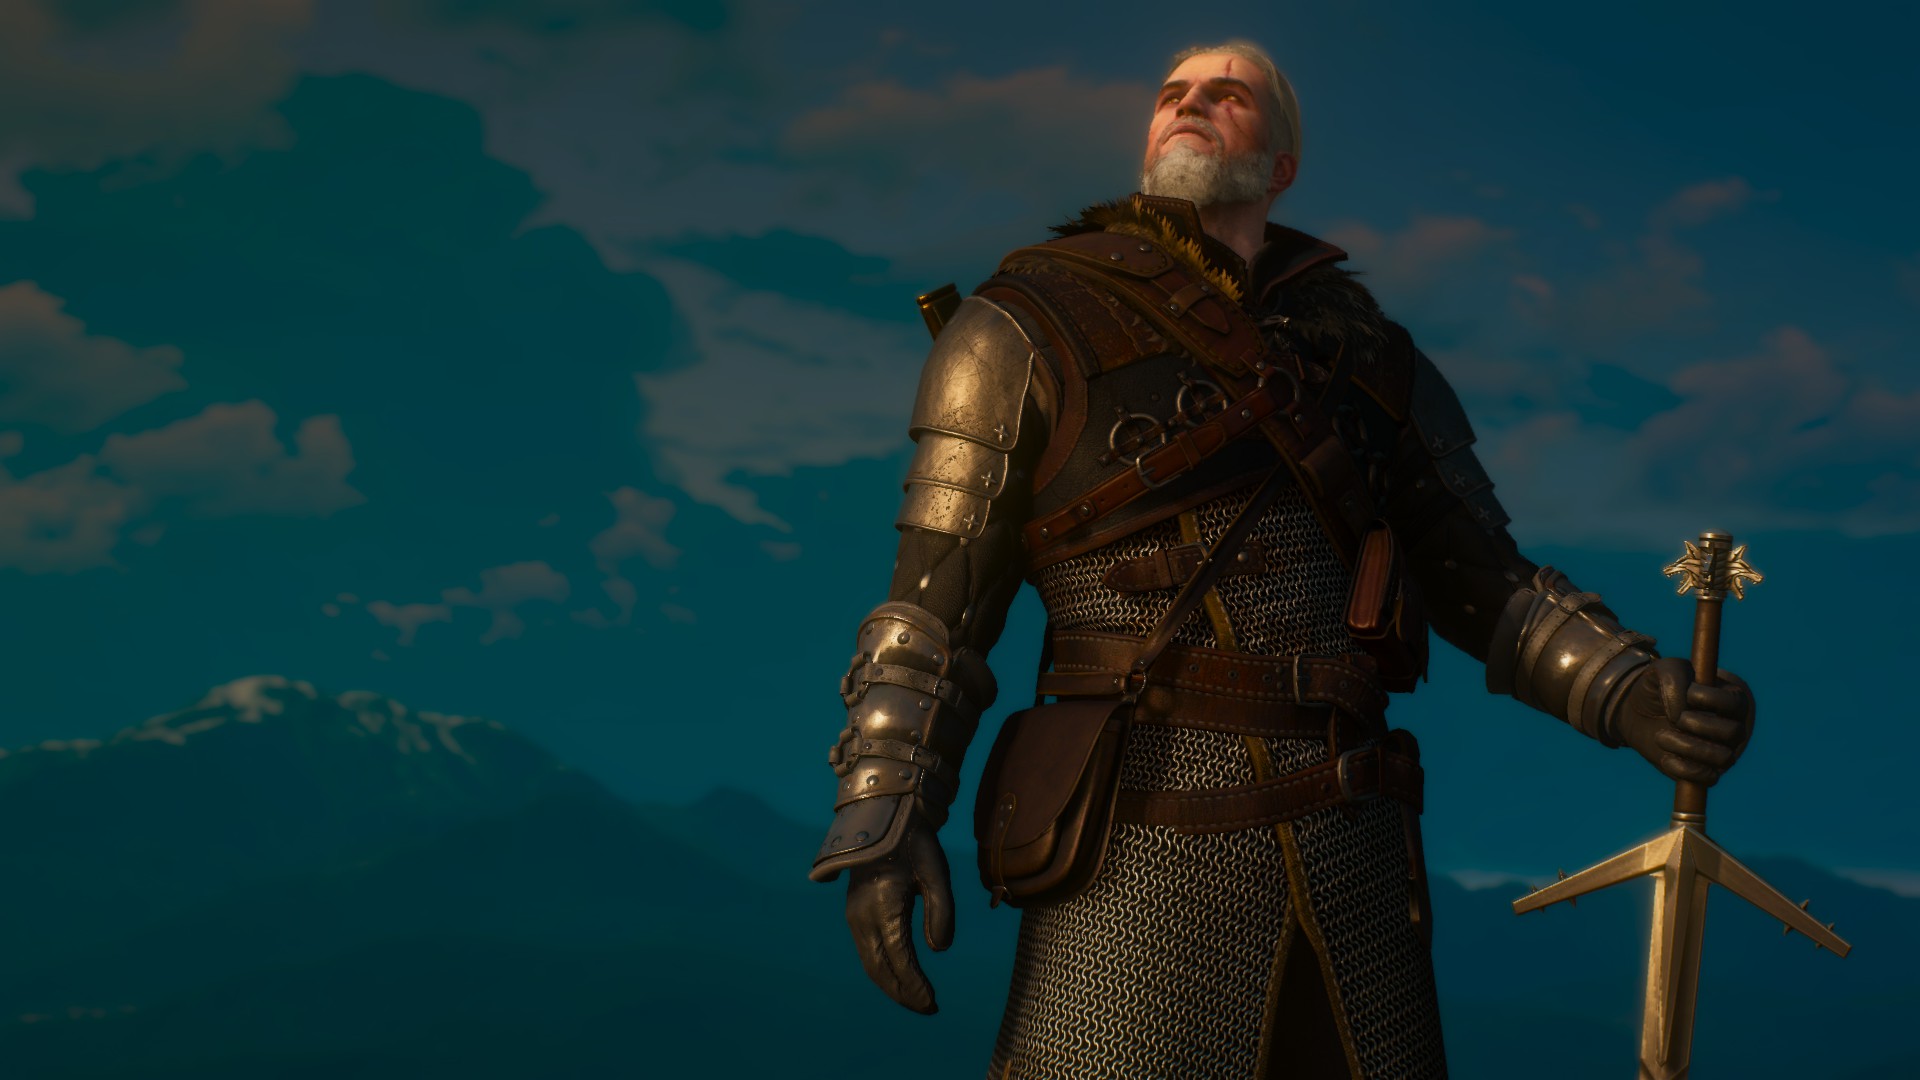 The Witcher 3 Wild Hunt The Witcher 3 Wild Hunt Blood And Wine Toussaint Geralt Of Rivia The Witcher 1920x1080